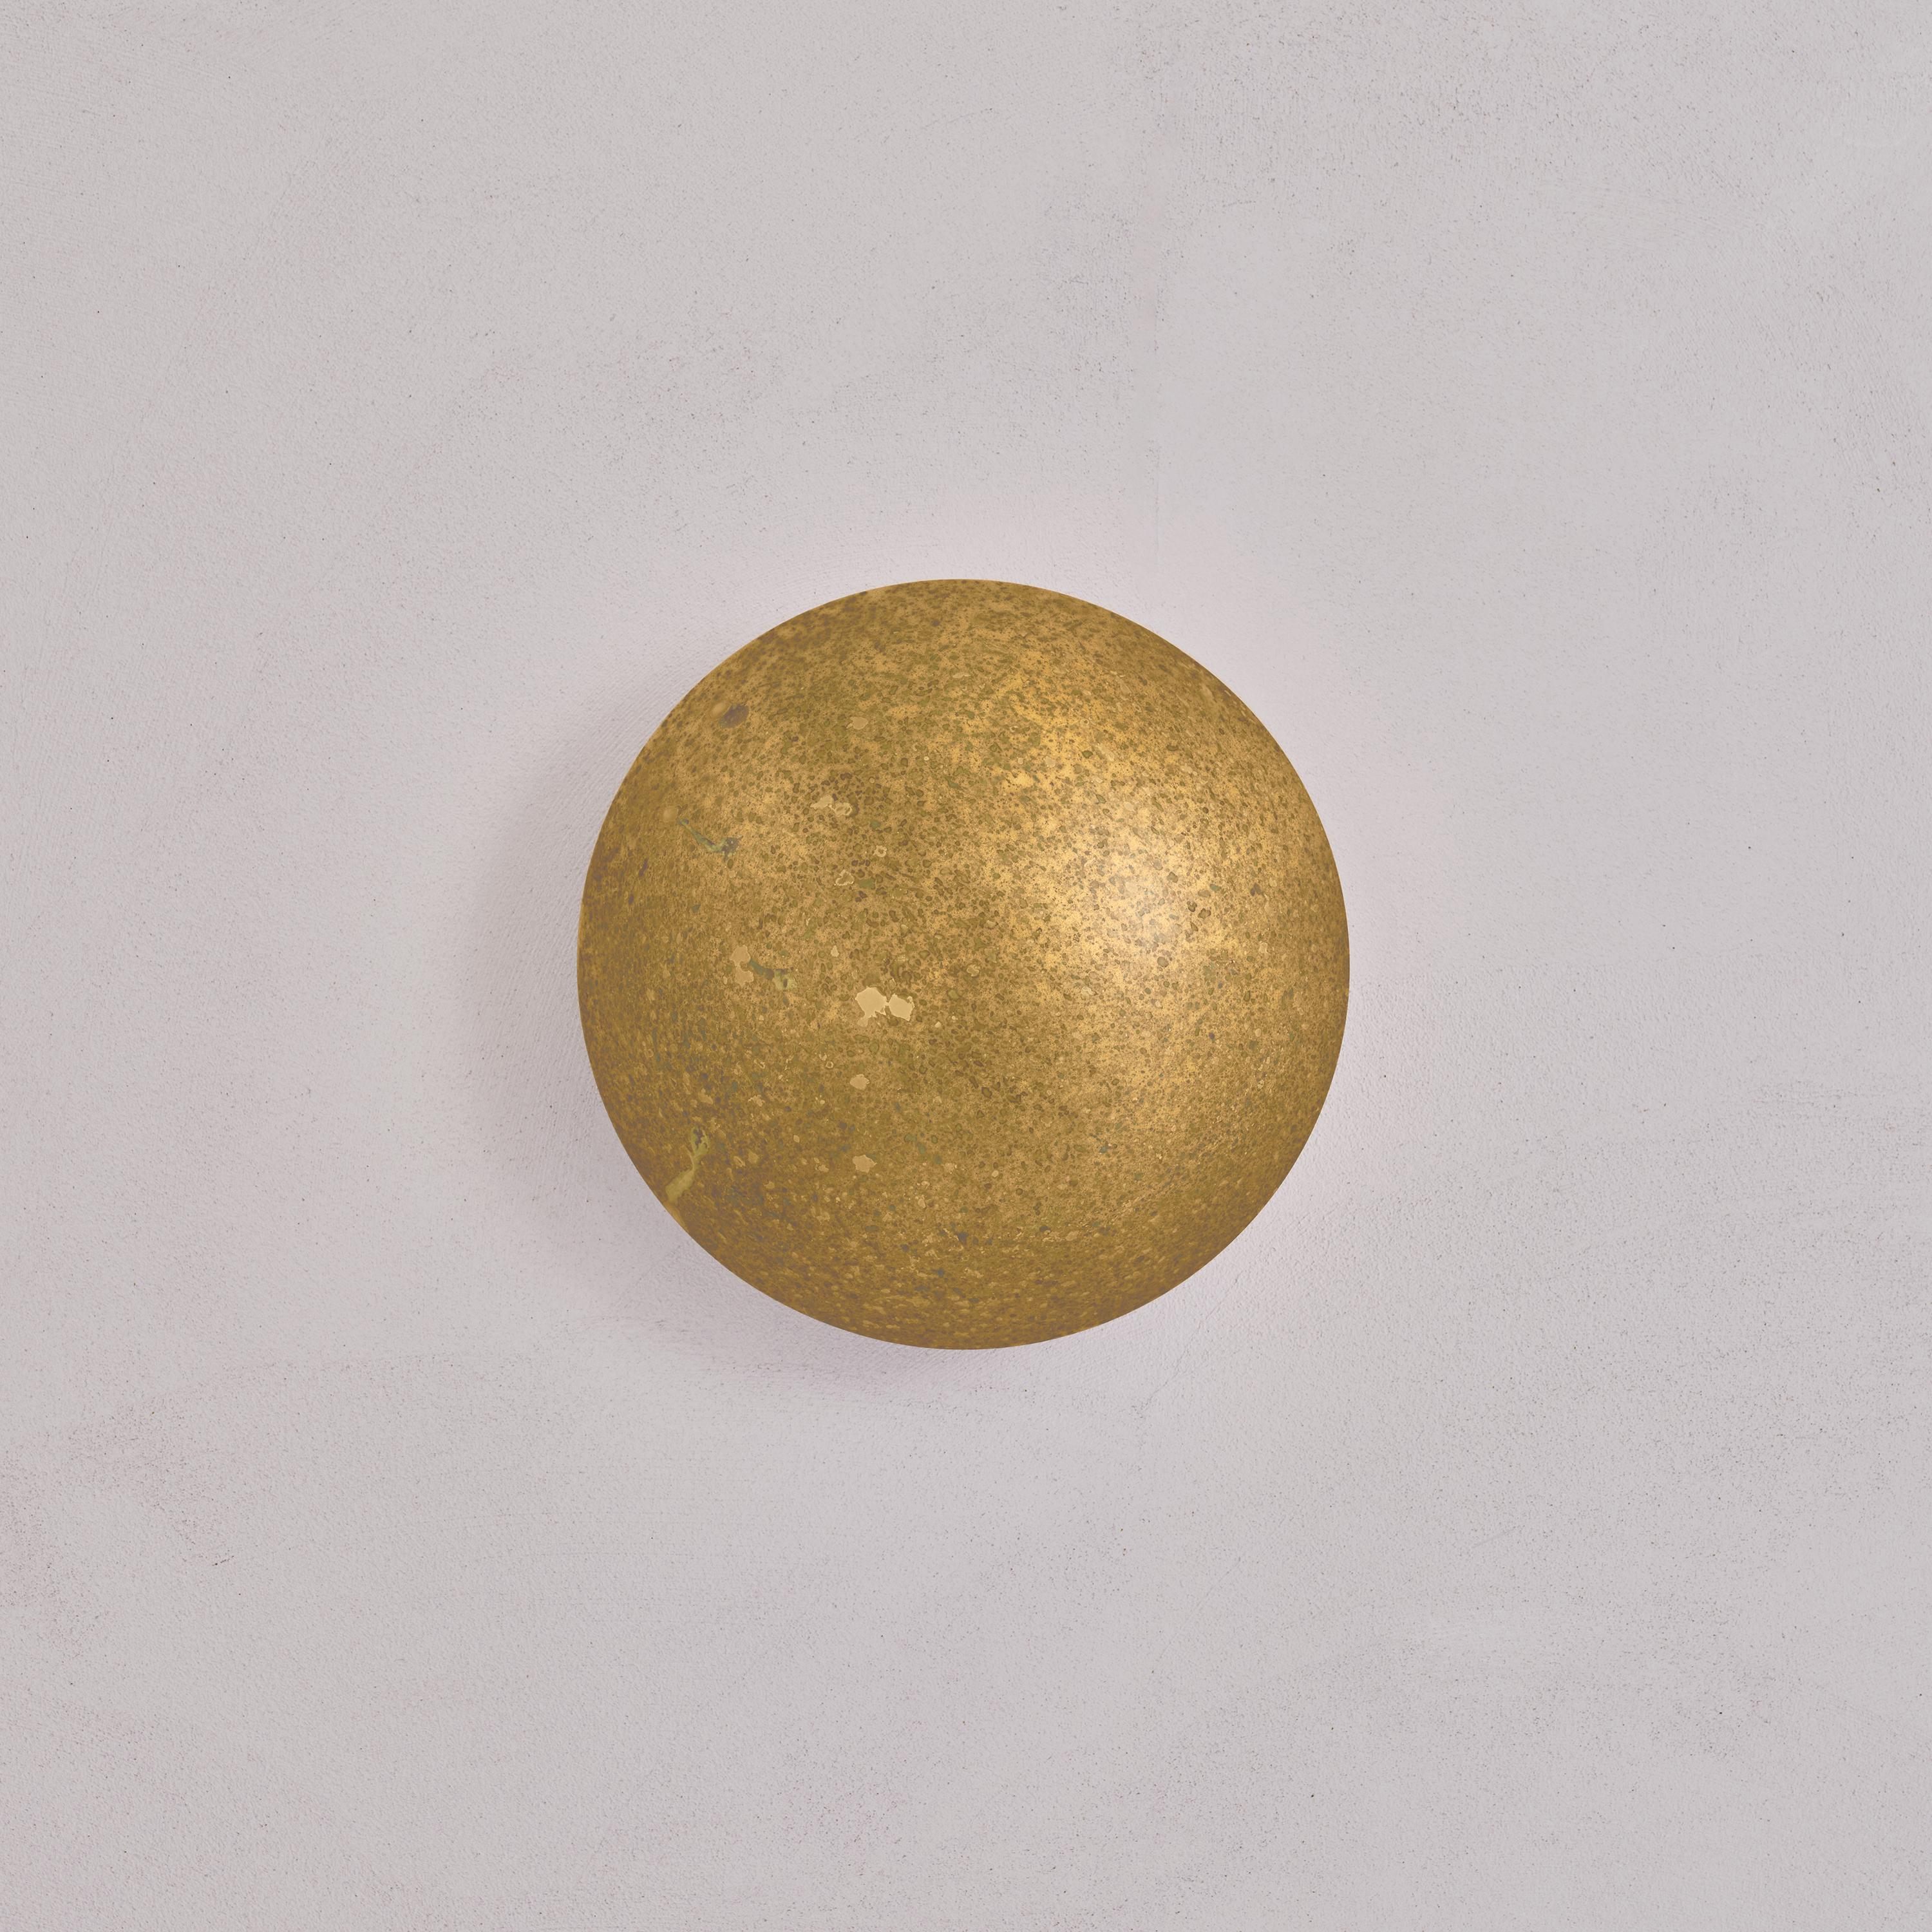 Organic Modern Cosmic 'Comet Oxidium 20' Hand-crafted Oxidised Patinated Brass Wall Light For Sale